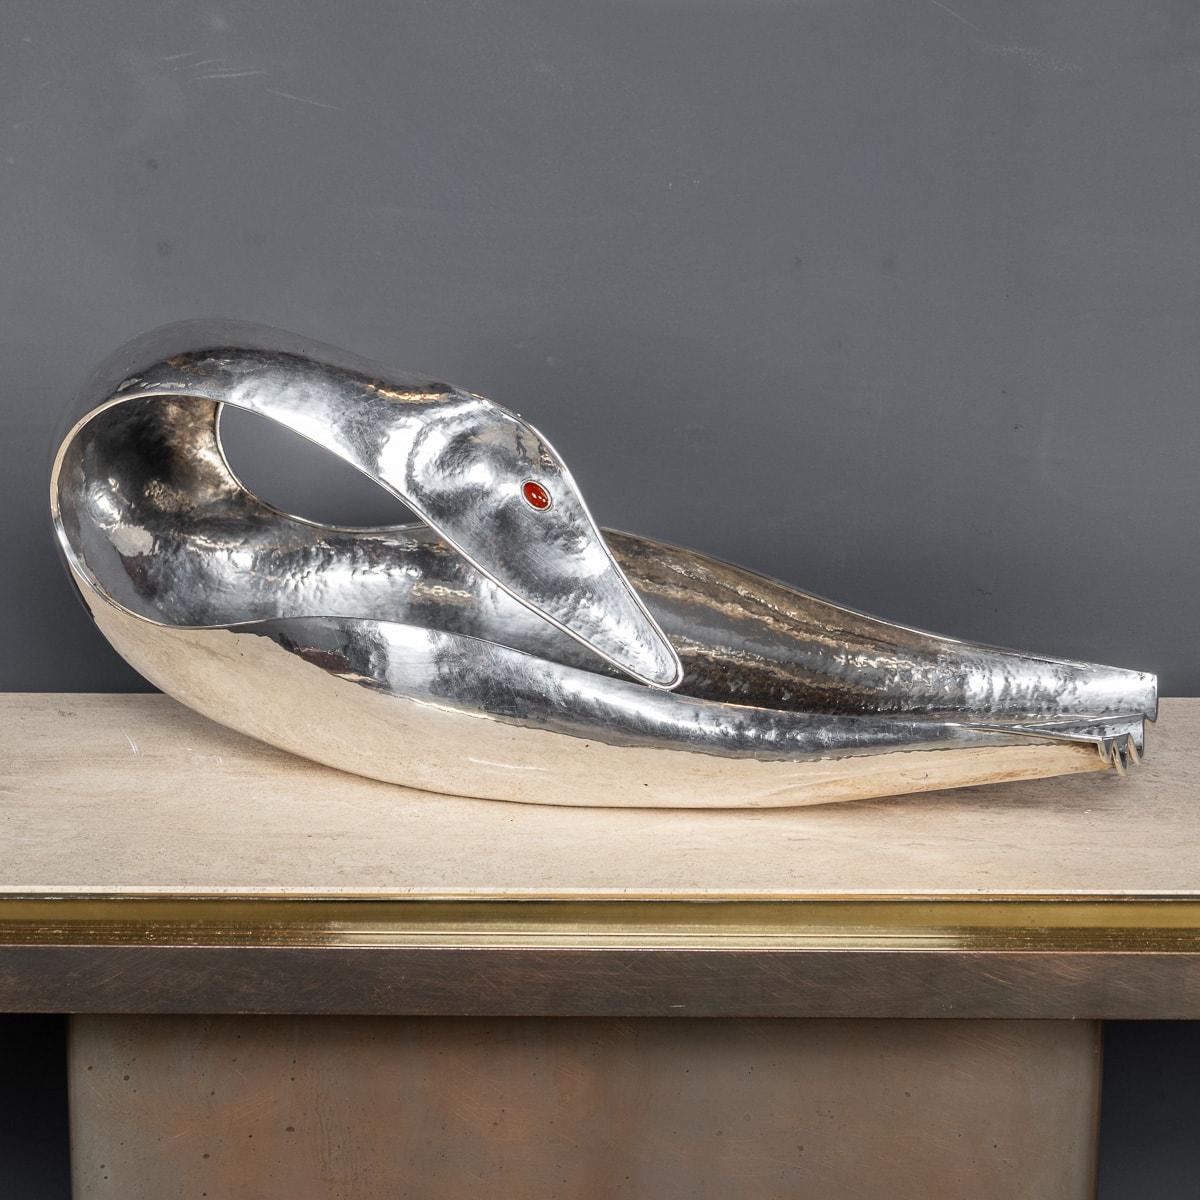 A stylish 20th Century Italian silver baguette tray in the form of a swan. Of a sleek, smooth form folds its neck back on itself revealing eyes made from carnelian. This modernist swan can hold bread and baguettes as a table centerpiece or as a